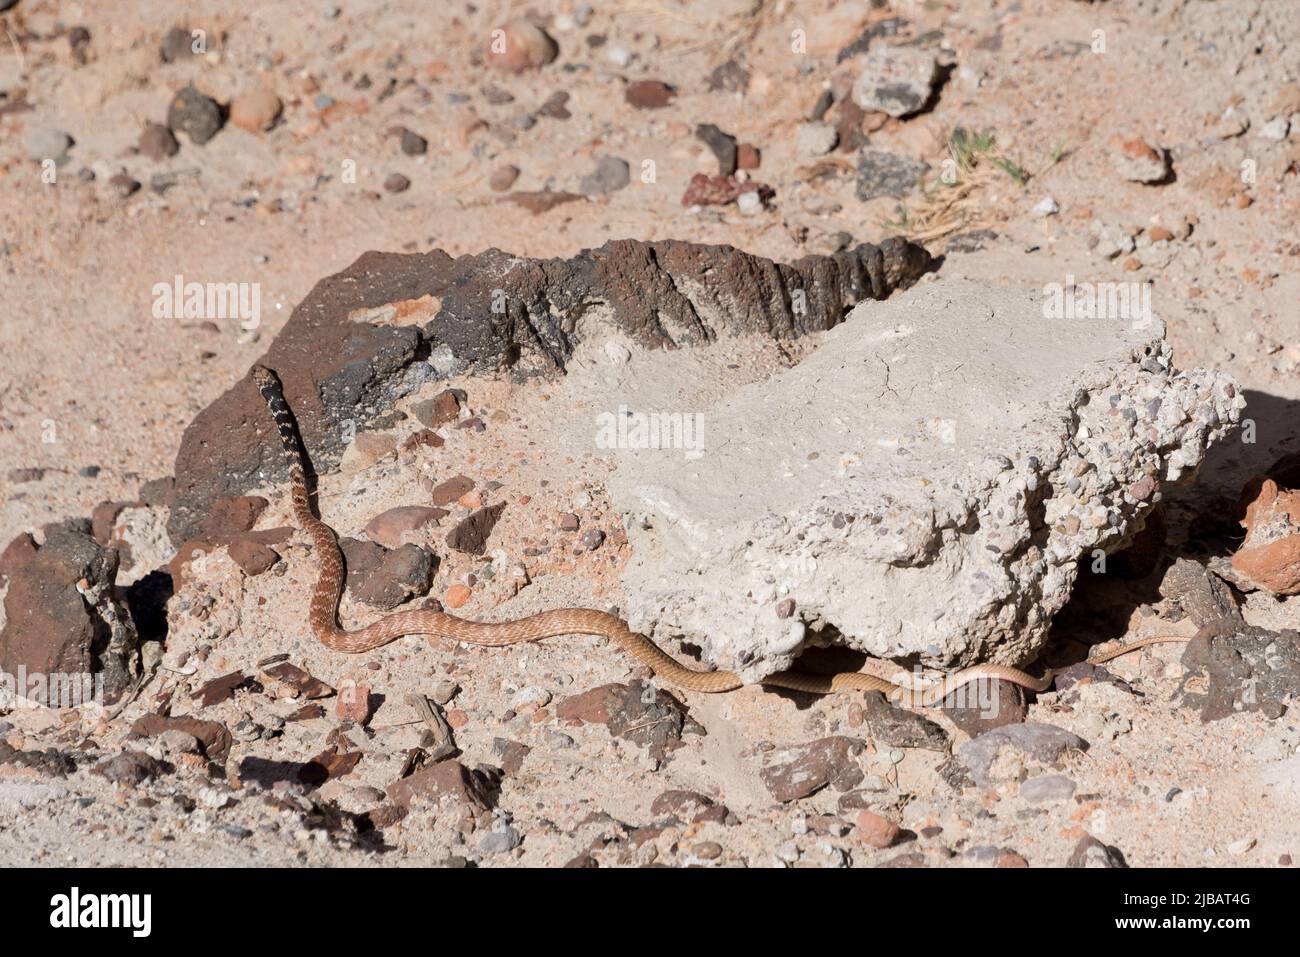 A western coachwhip snake (red racer) matches rocks beneath it in the Mojave desert at Red Rock Canyon State Park in California. Evolution, camouflage. Stock Photo